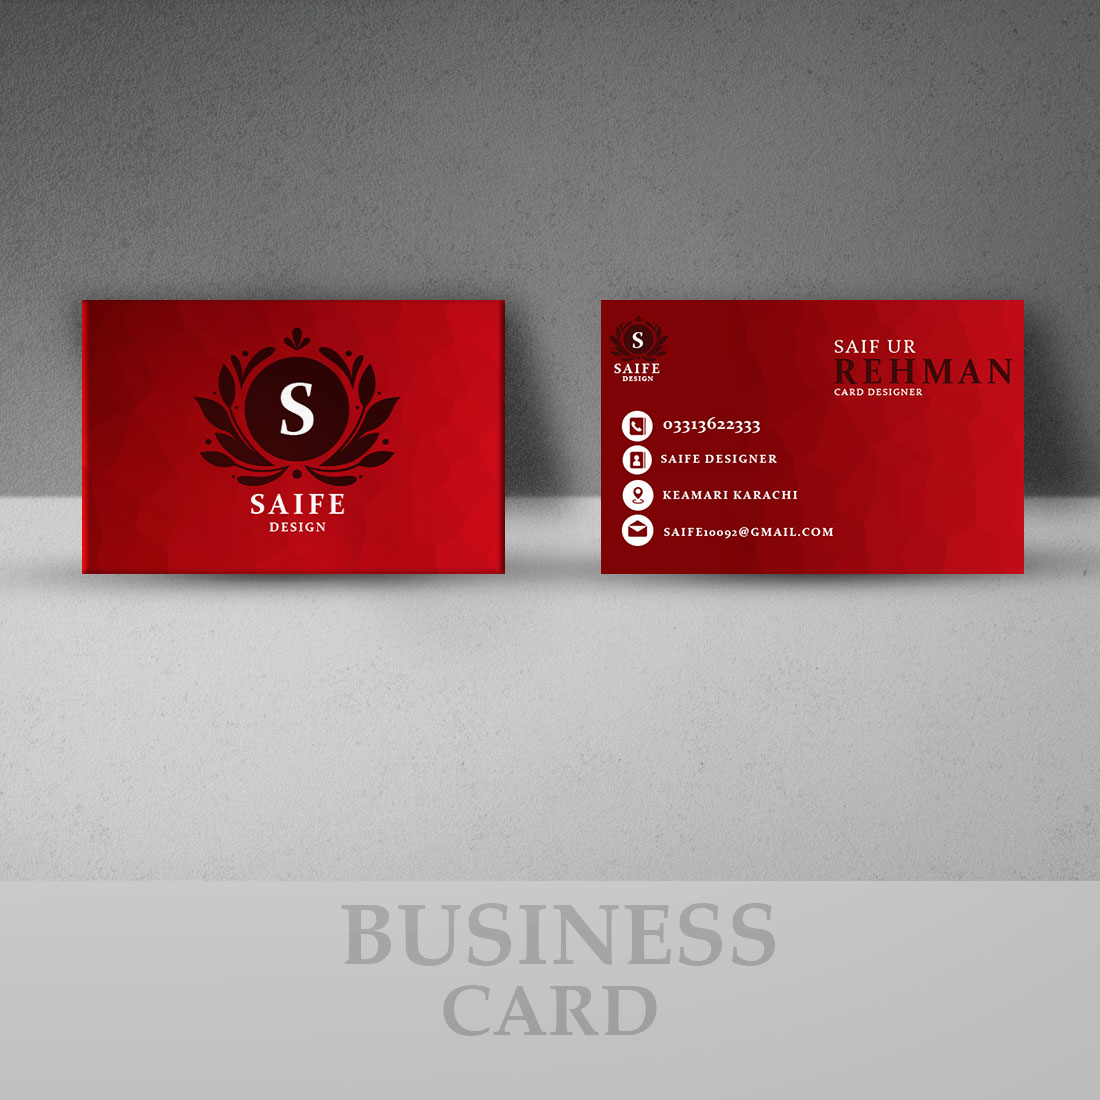 BUSINESS CARD preview image.